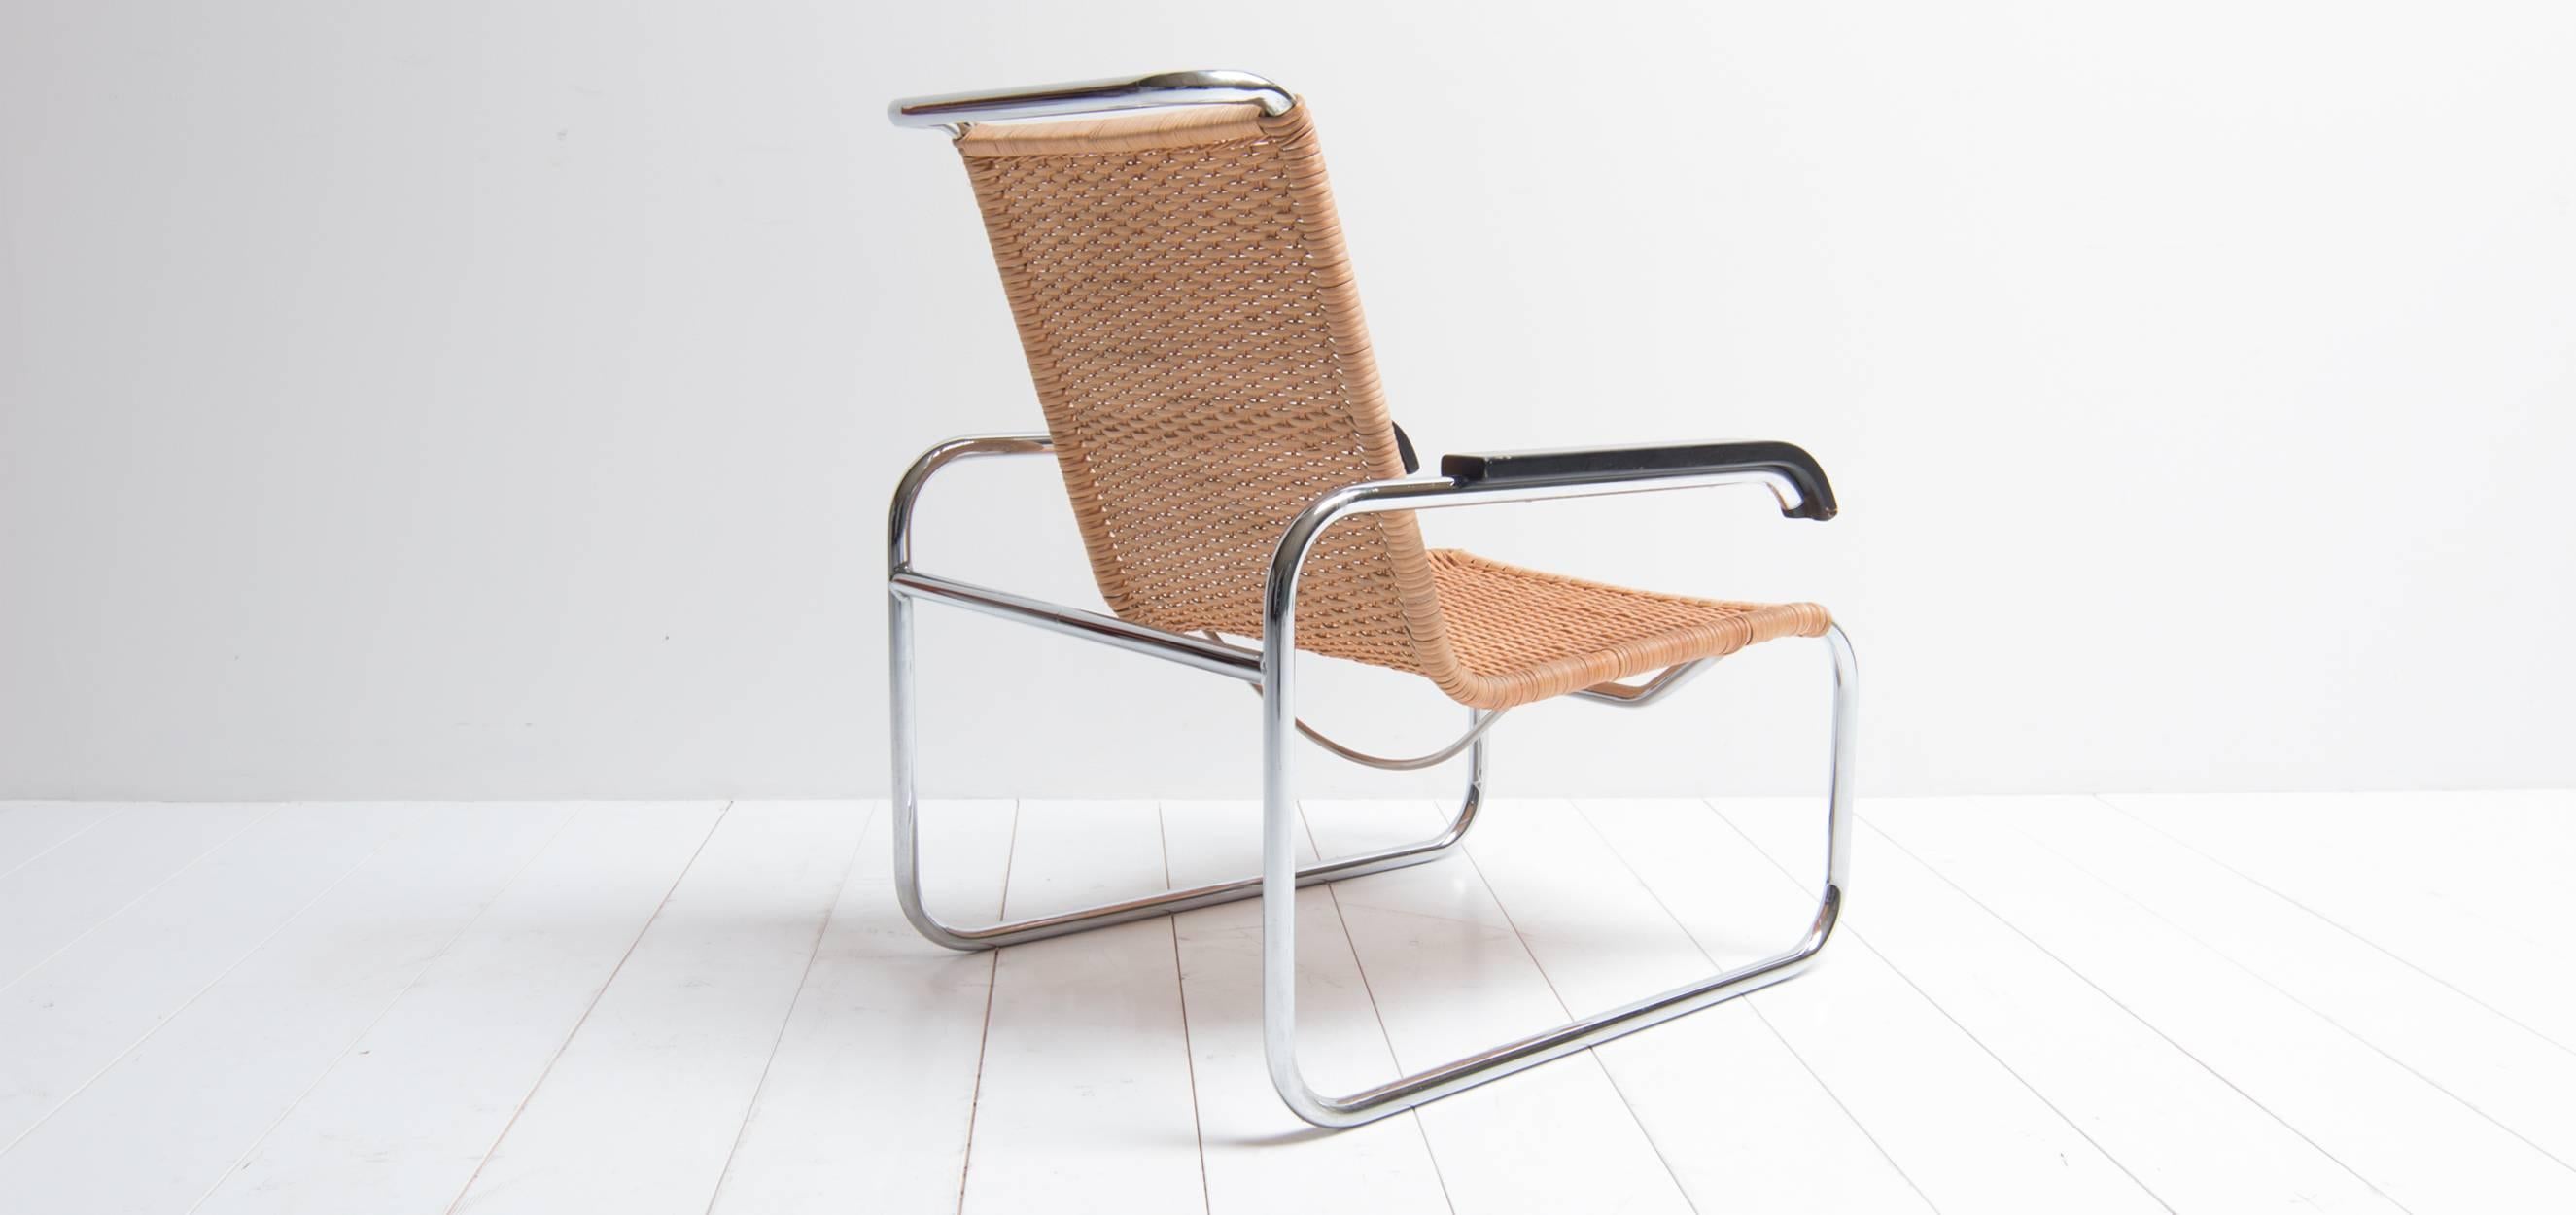 Vintage design cantilever designed by Marcel Breuer, model B35. The chair is produced by Thonet in Germany. This cantilever is matted with rattan and has wooden armrests with a chromed tubular steel frame. This vintage design cantilever is in good